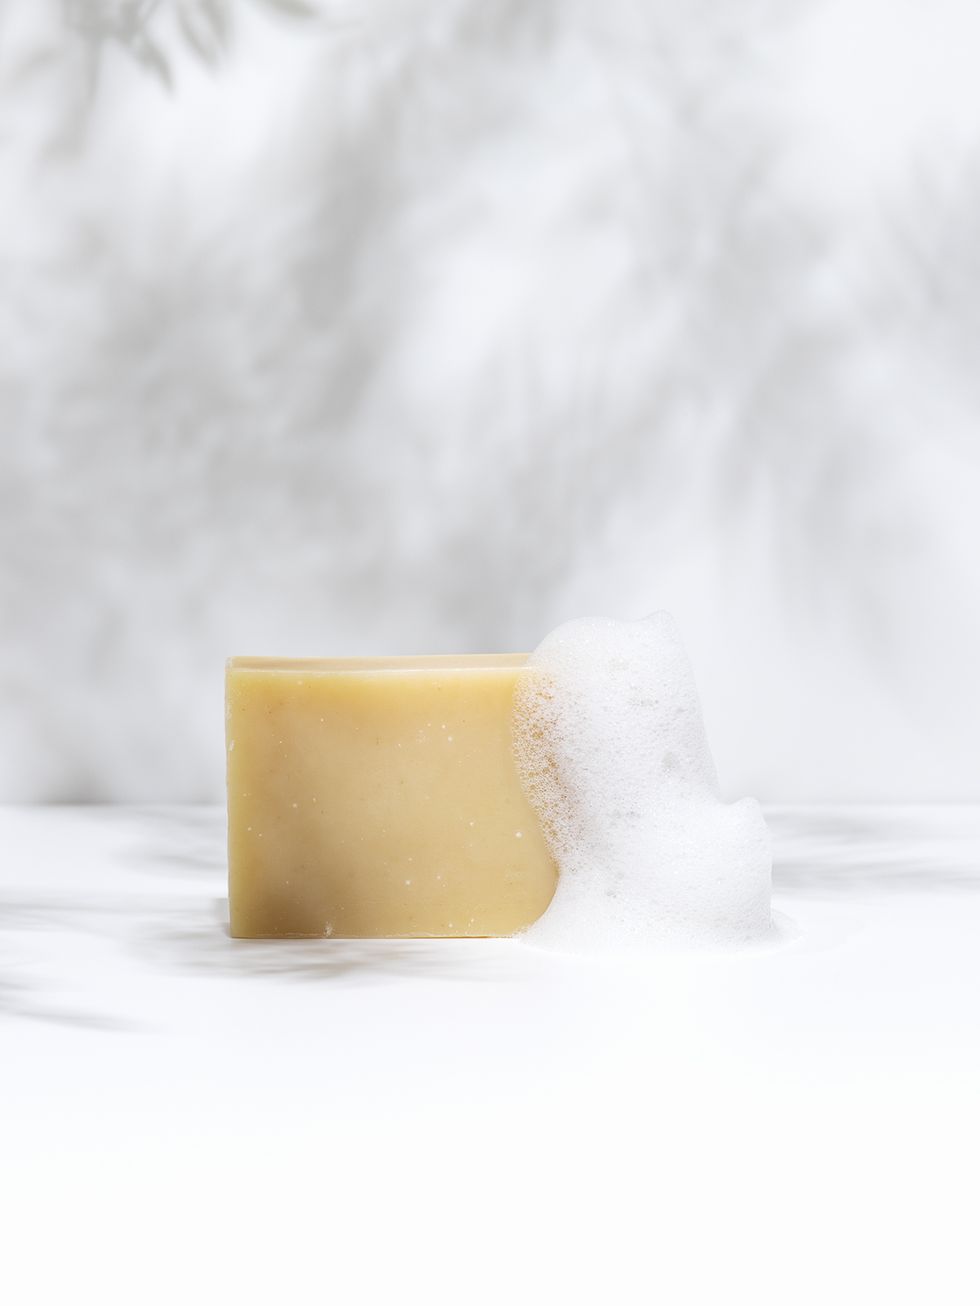 Ingredient, Uirō, Wax, Sweetness, Kitchen utensil, Chemical compound, Bar soap, Saccharin, Cheese, Sugar substitute, 